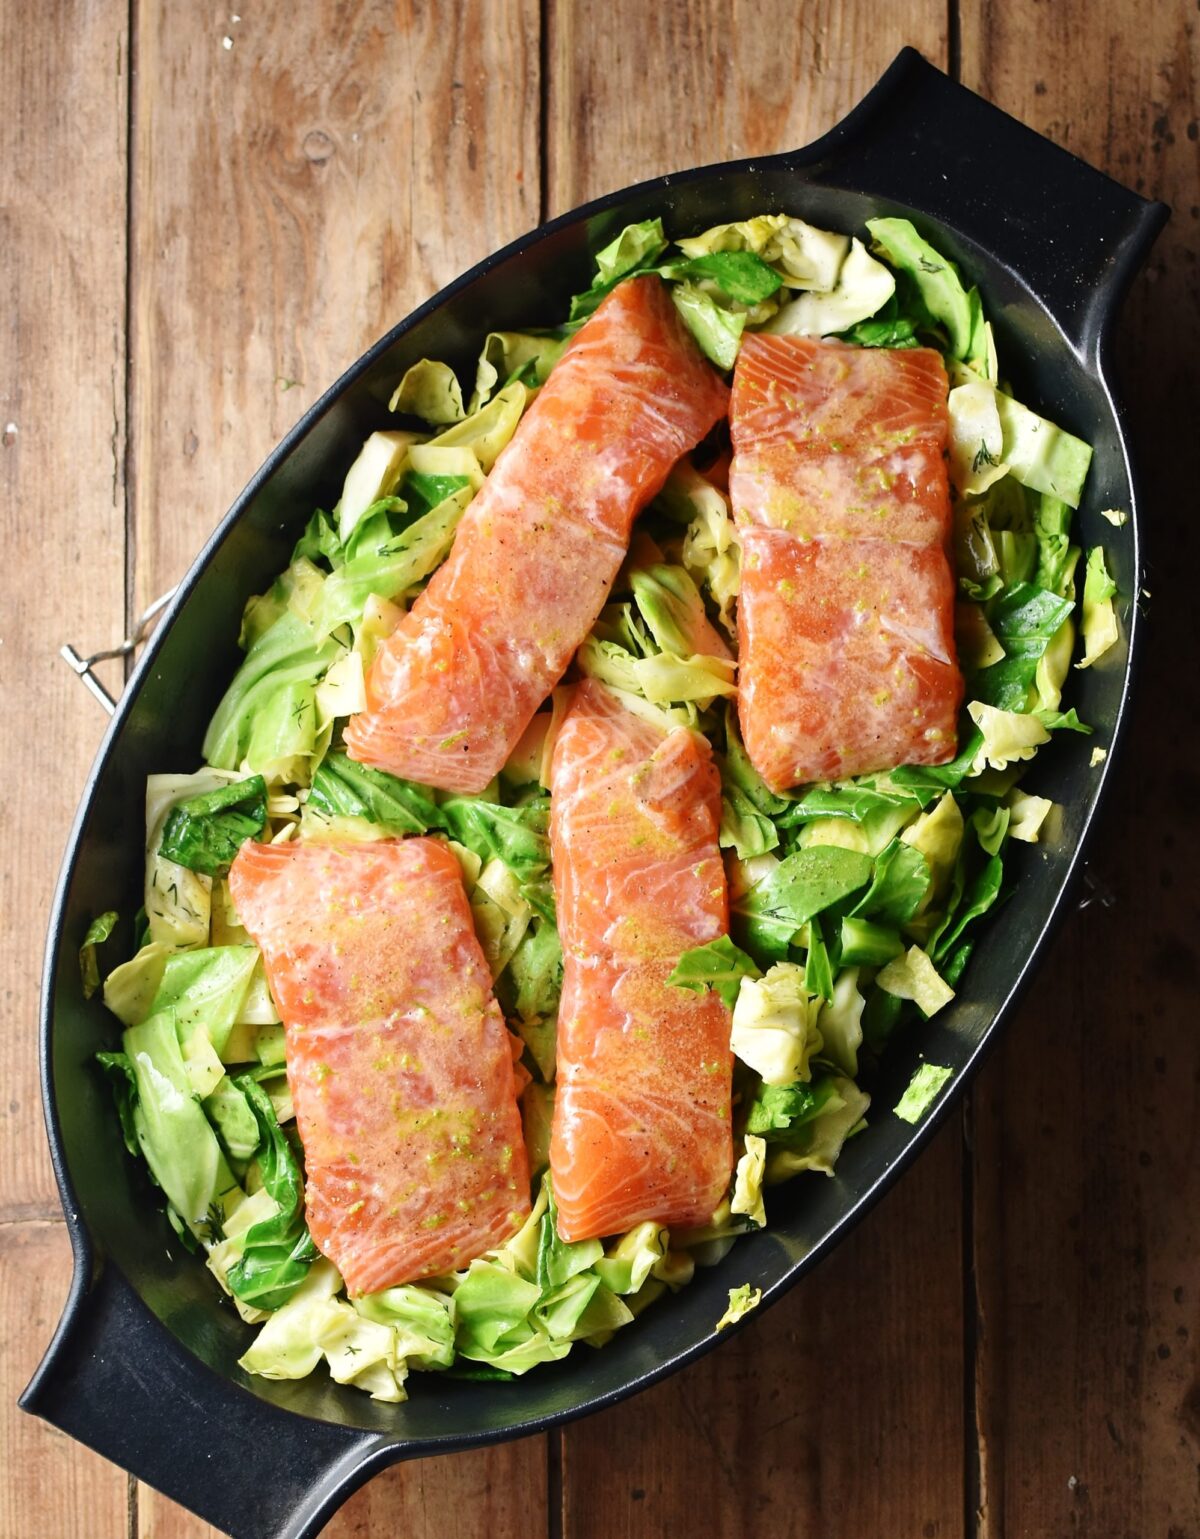 Unbaked 4 salmon pieces on bed of cabbage in black oval dish.